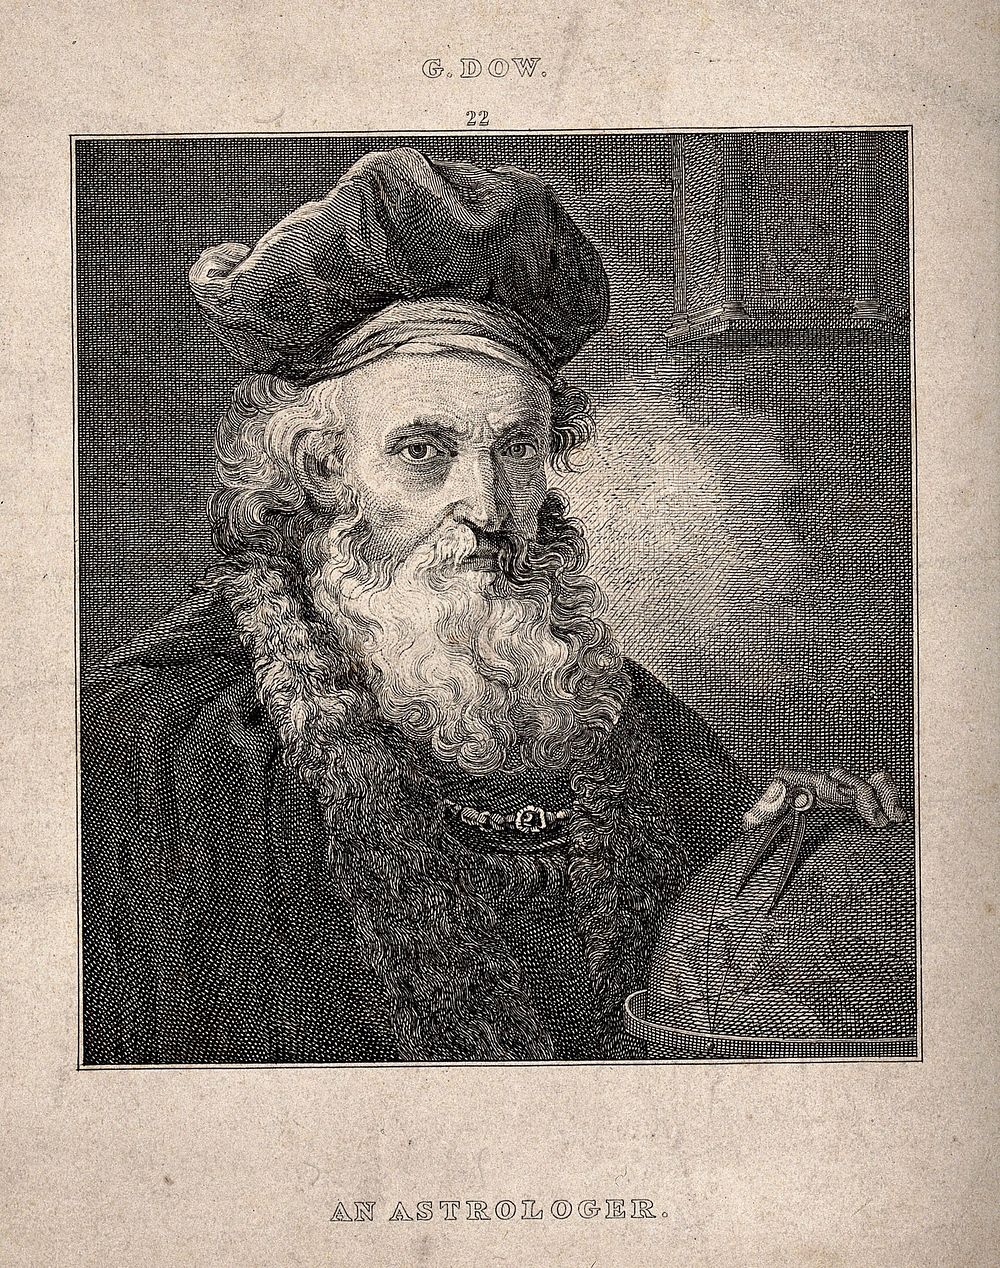 Astronomy: an astronomer in his study, leaning on a planetary globe, while holding a pair of dividers. Engraving.